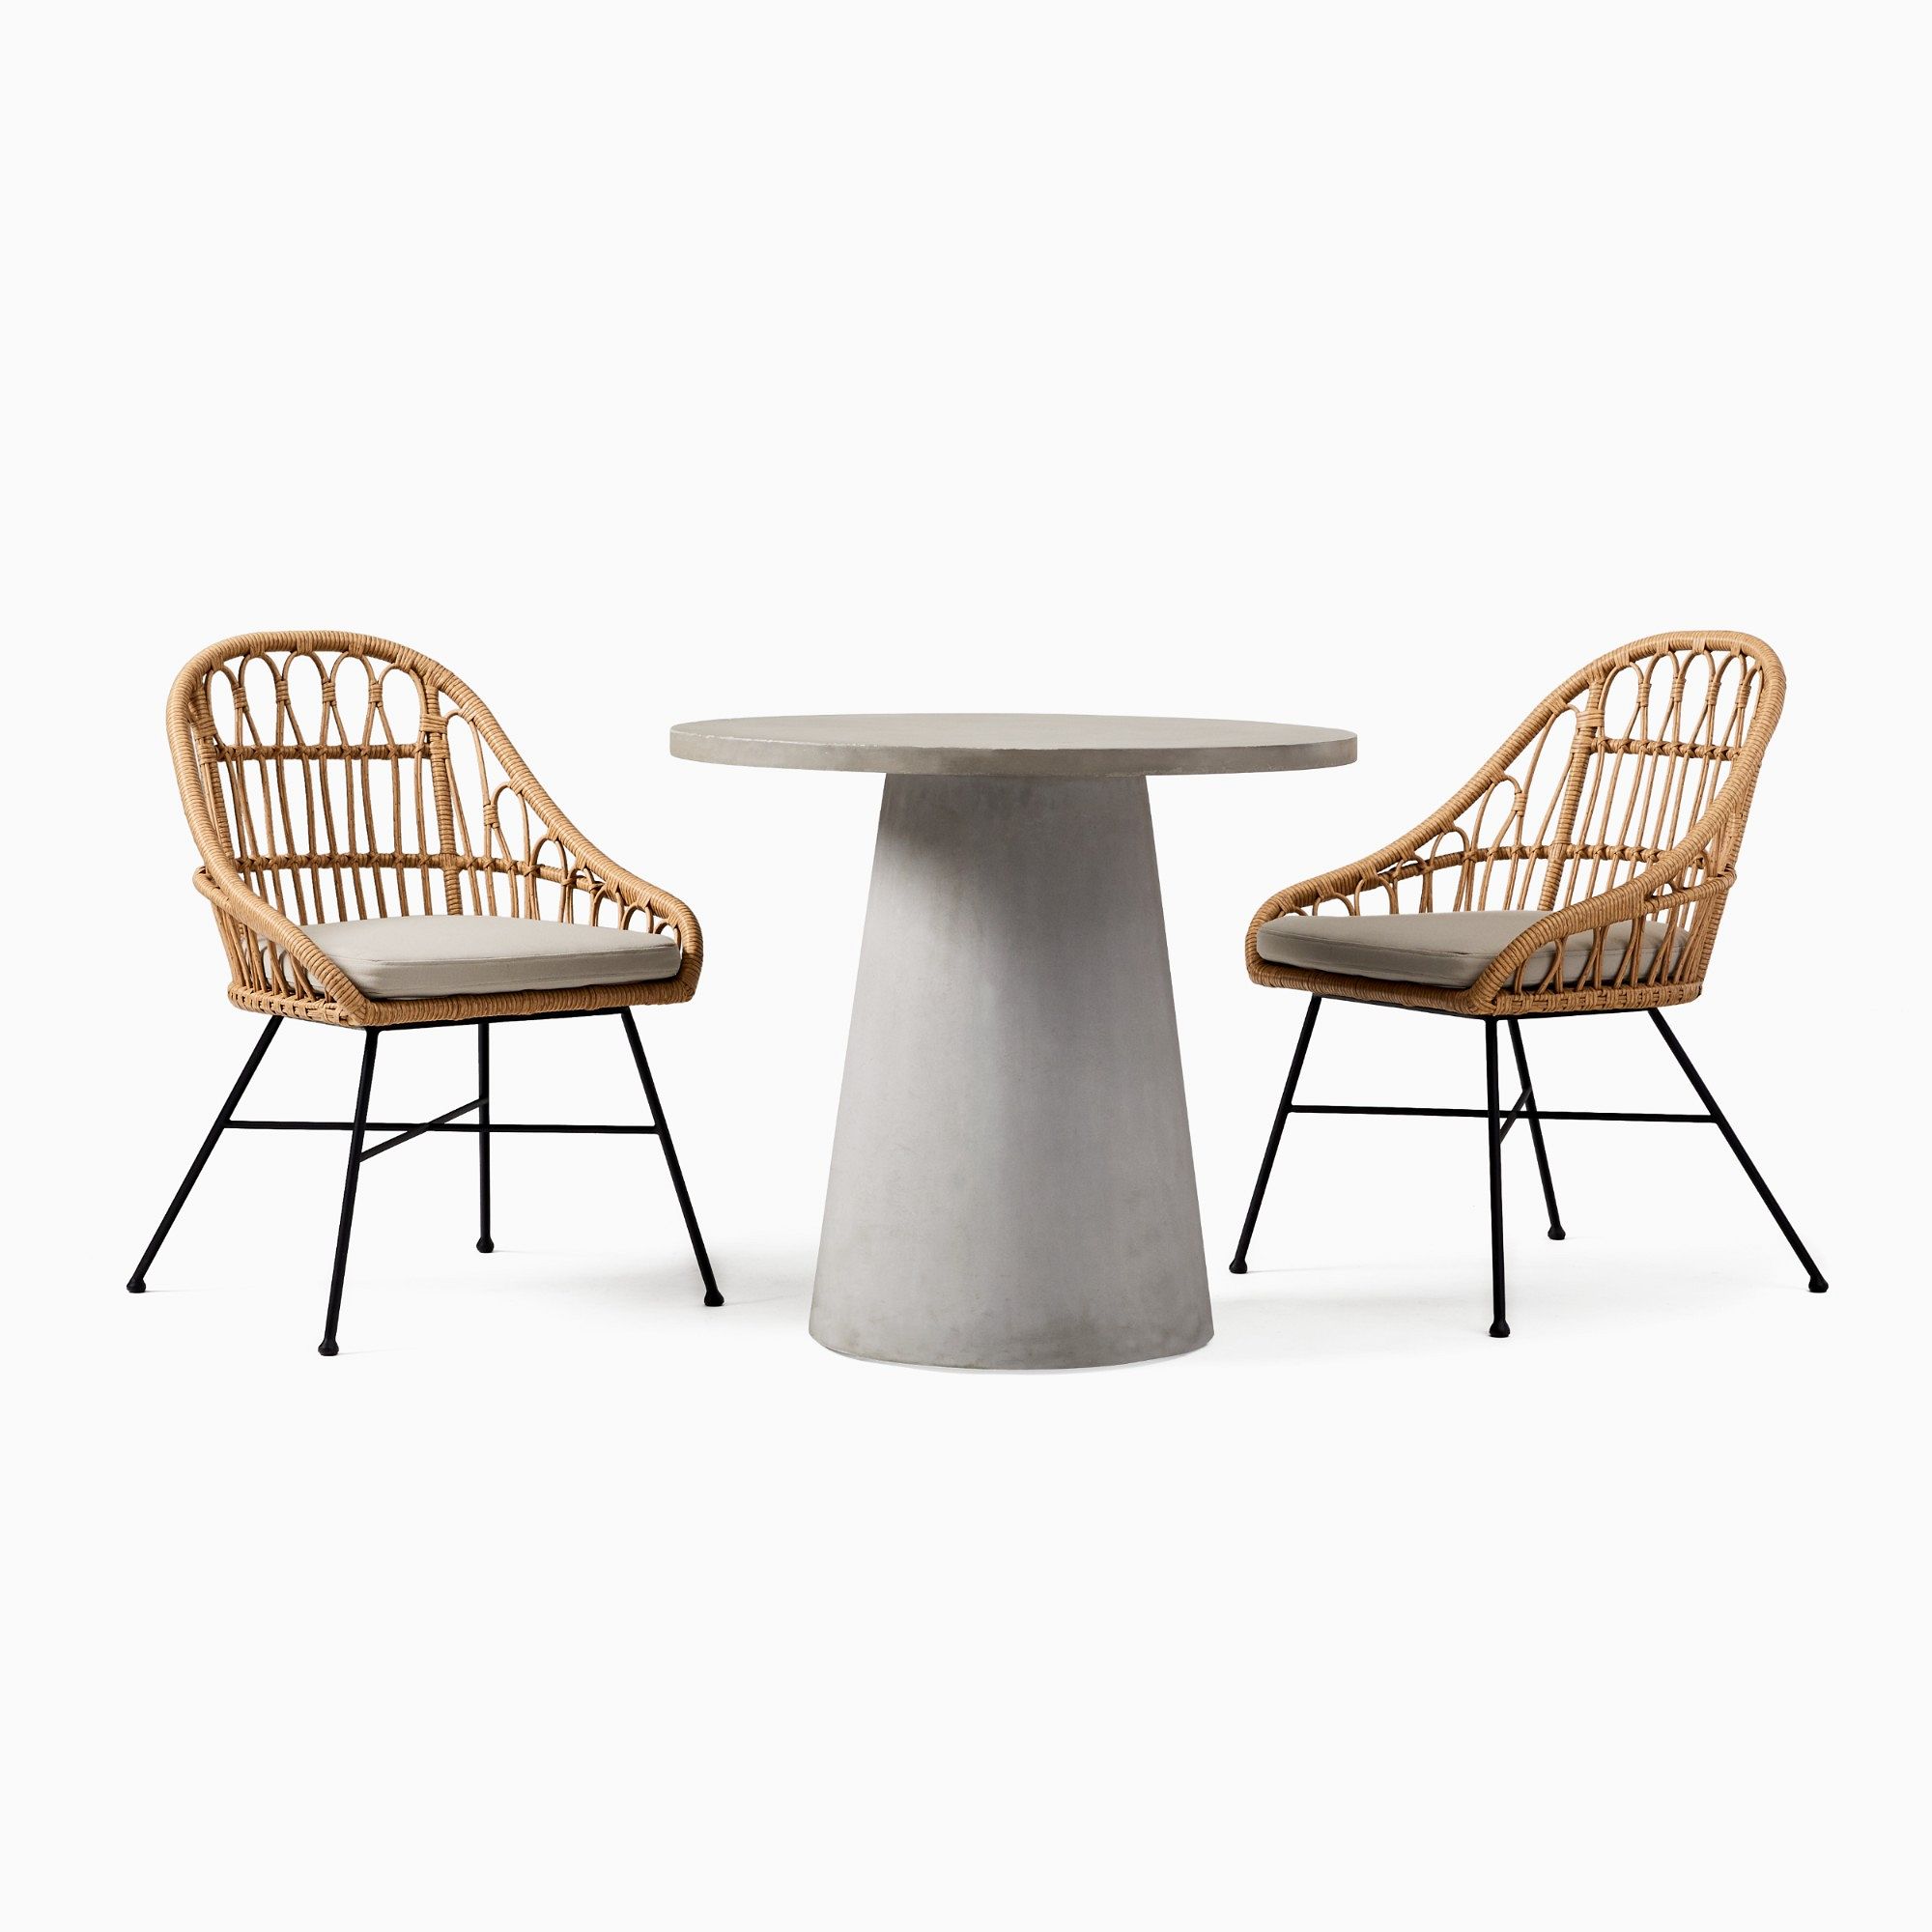 Concrete Pedestal Outdoor Dining Table (32) & Palma Dining Chairs Set | West Elm